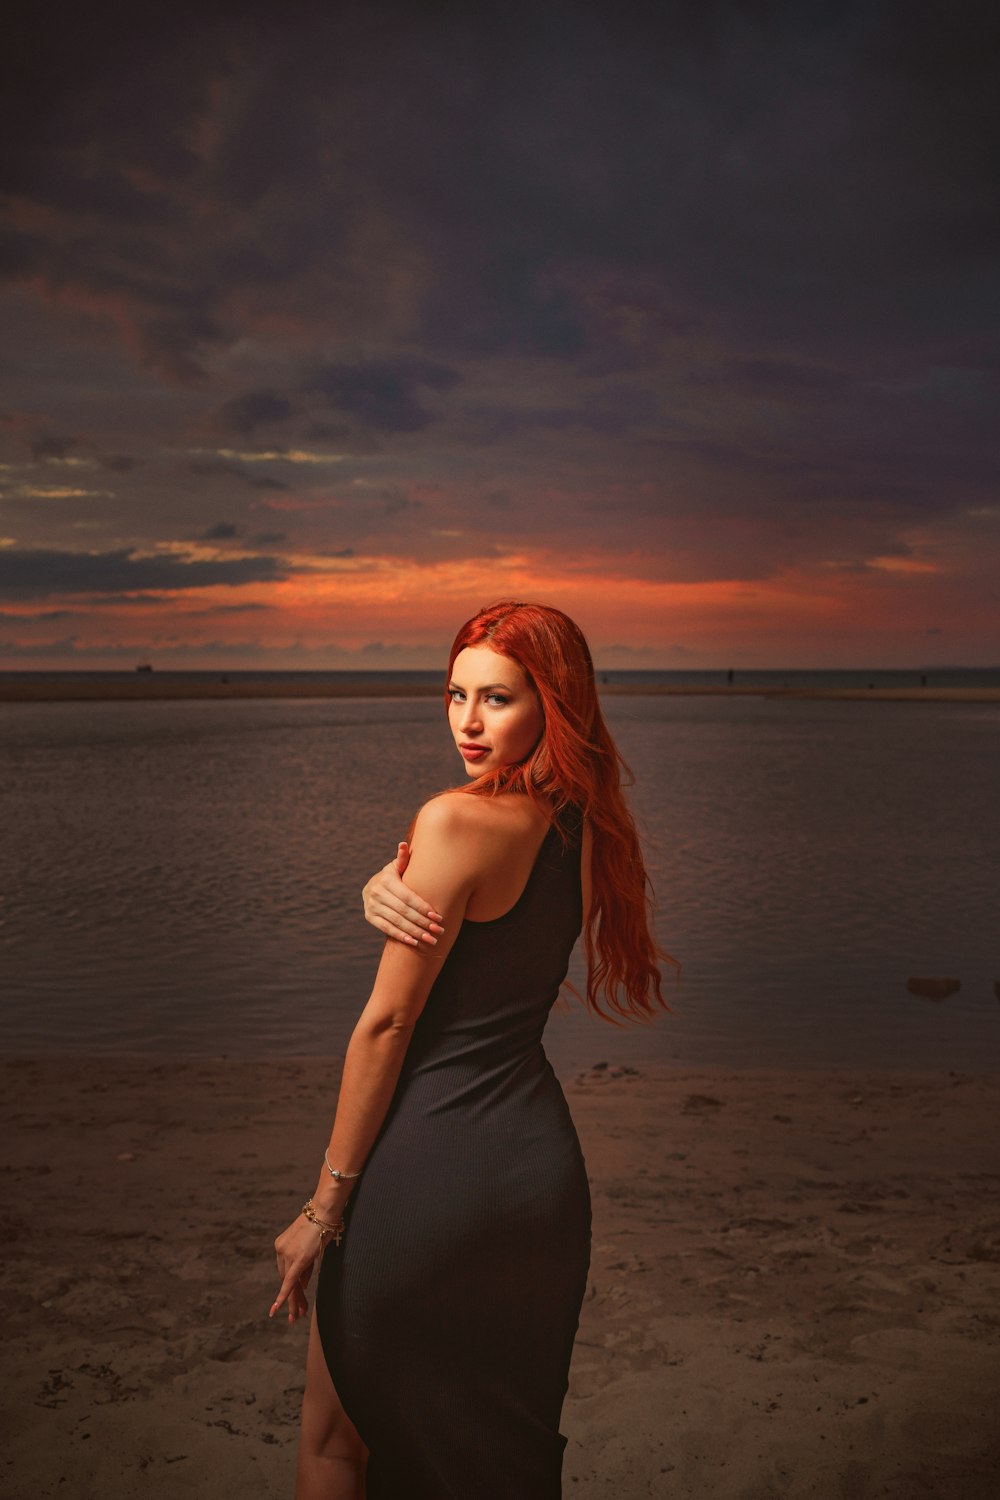 a woman with red hair standing on a beach